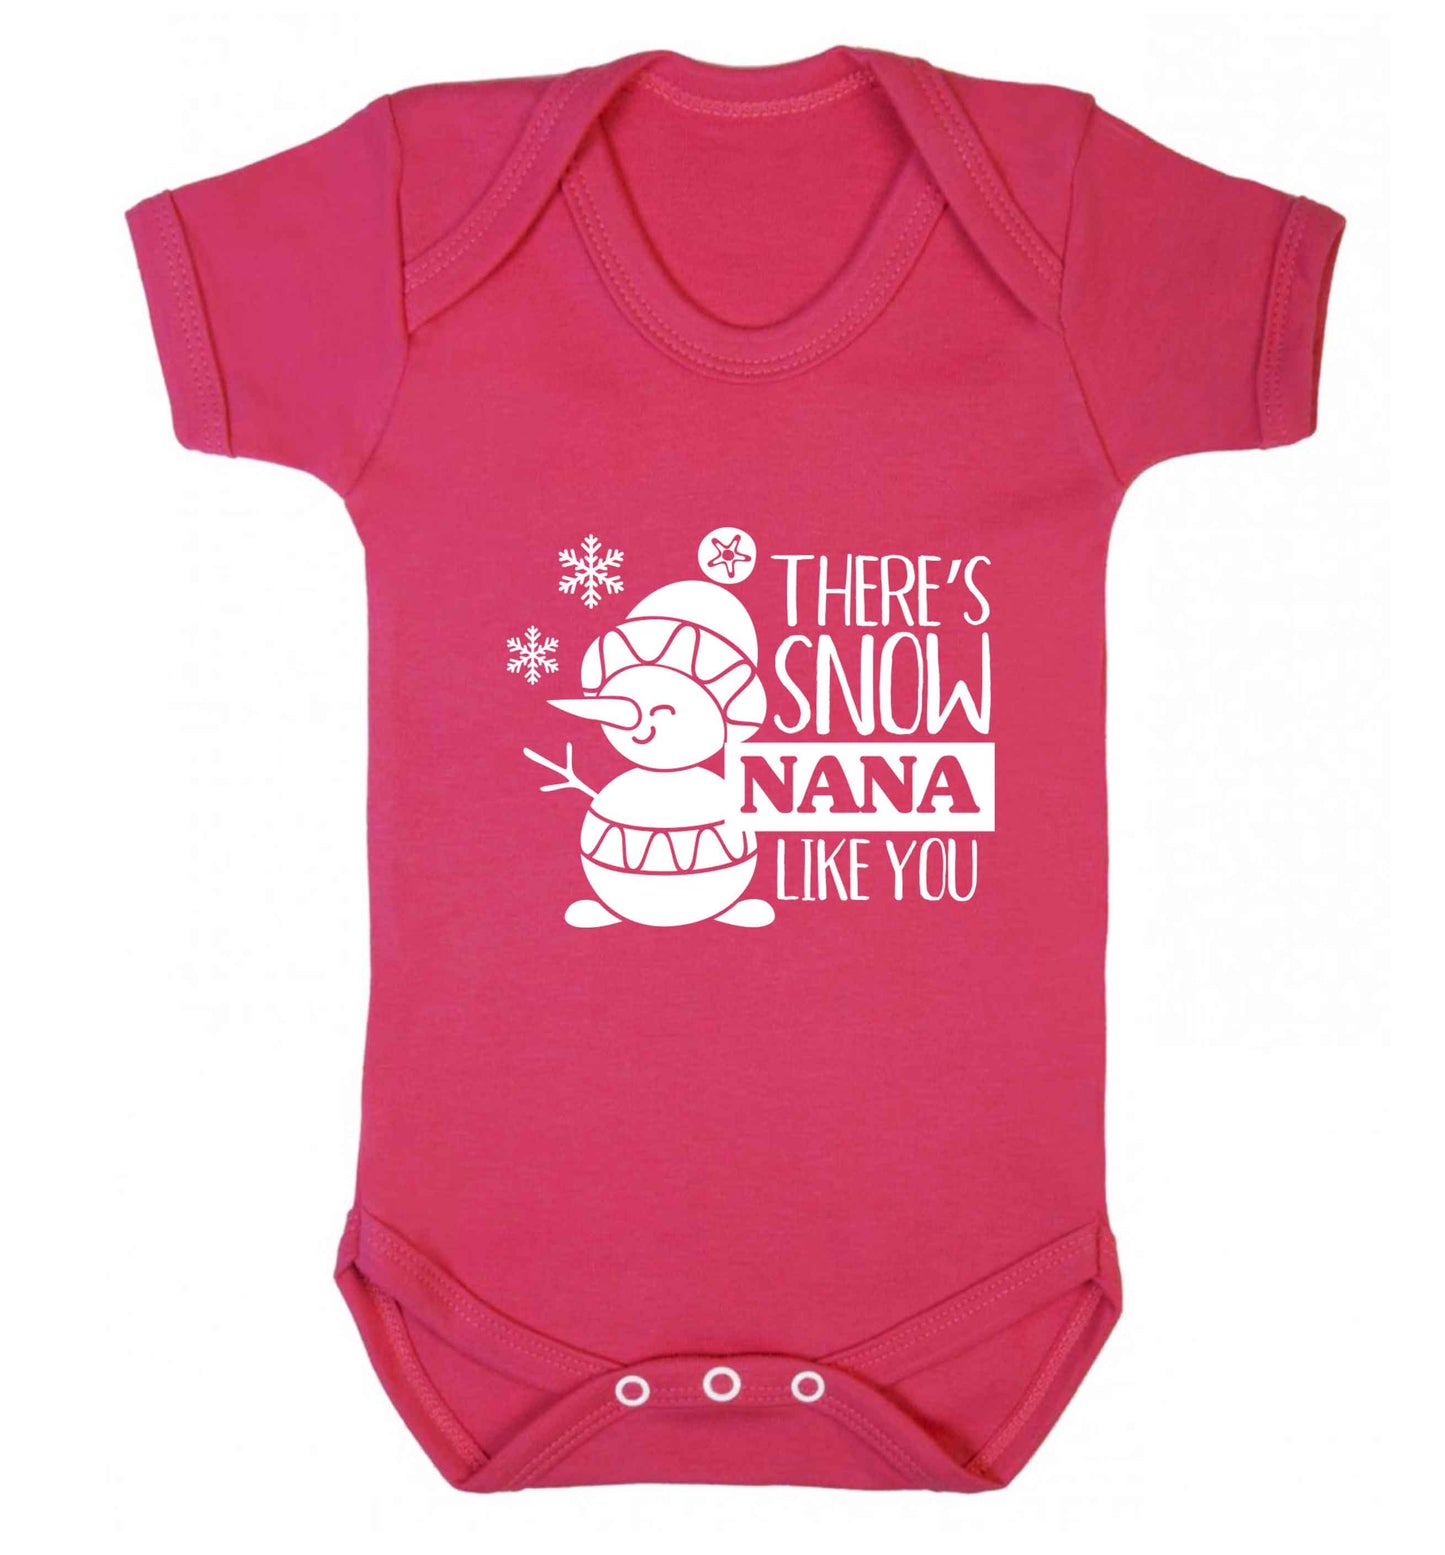 There's snow nana like you baby vest dark pink 18-24 months